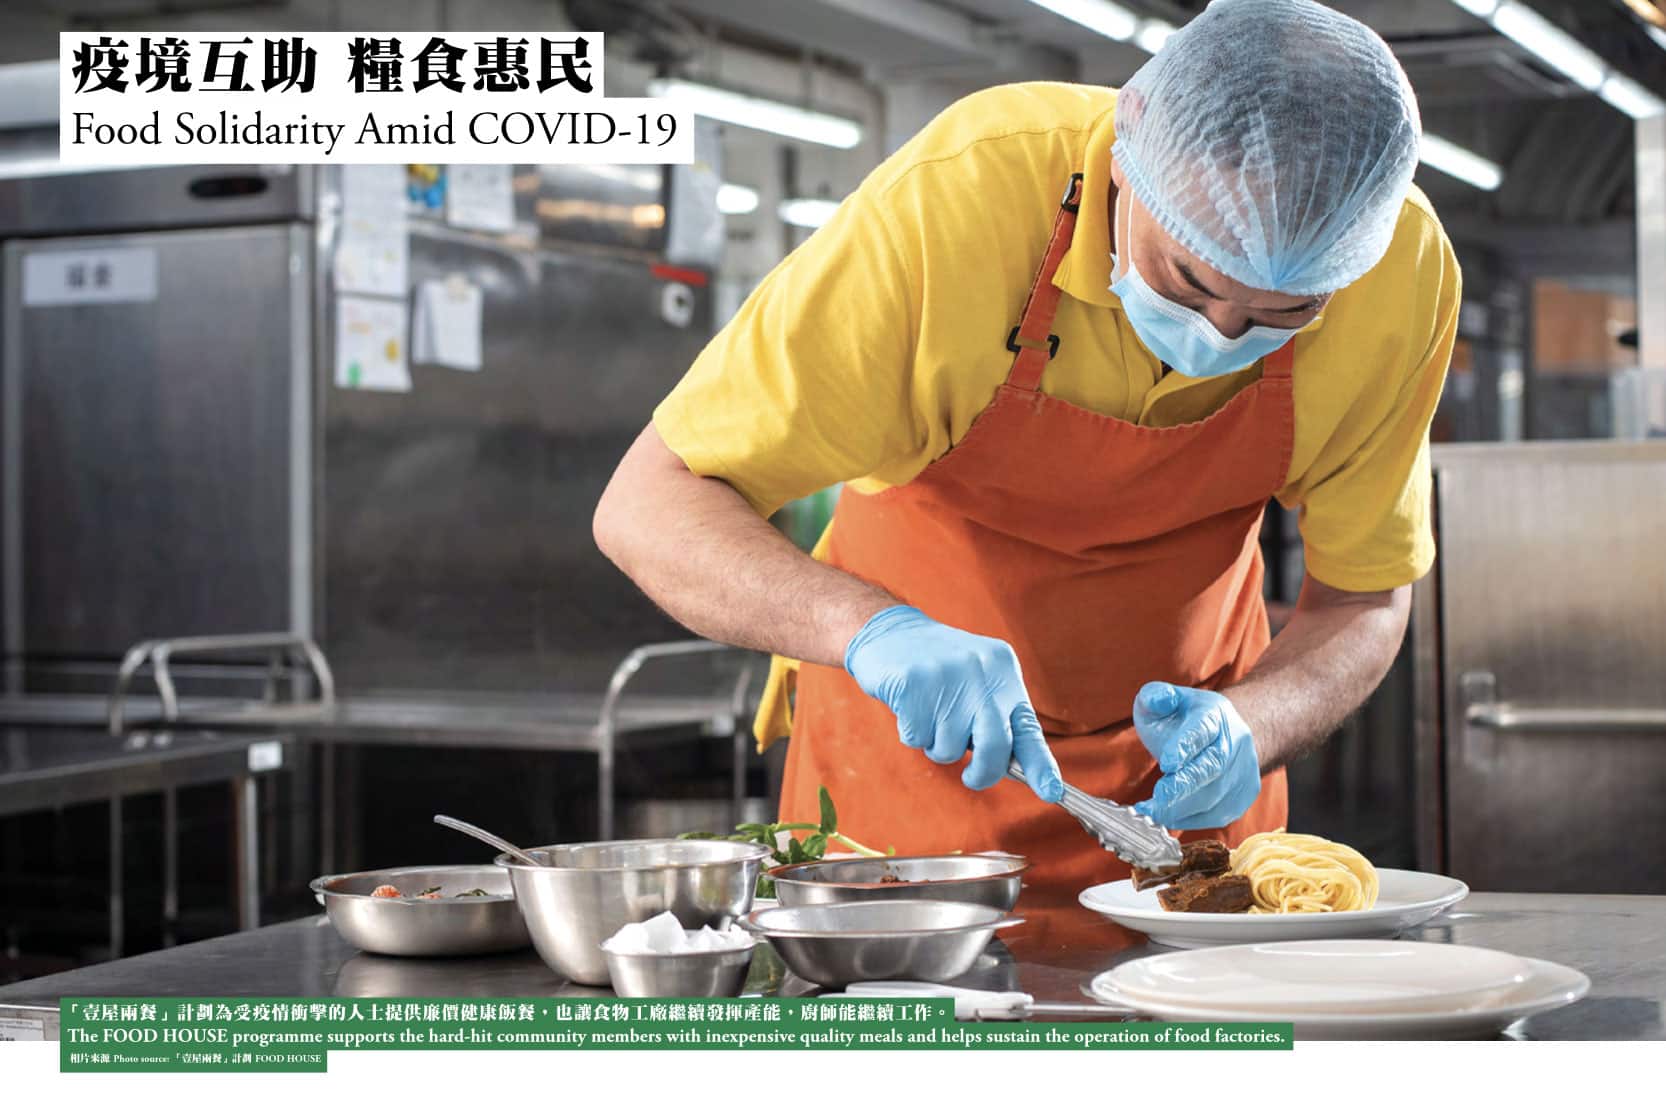 The FOOD HOUSE Programme in Hong Kong